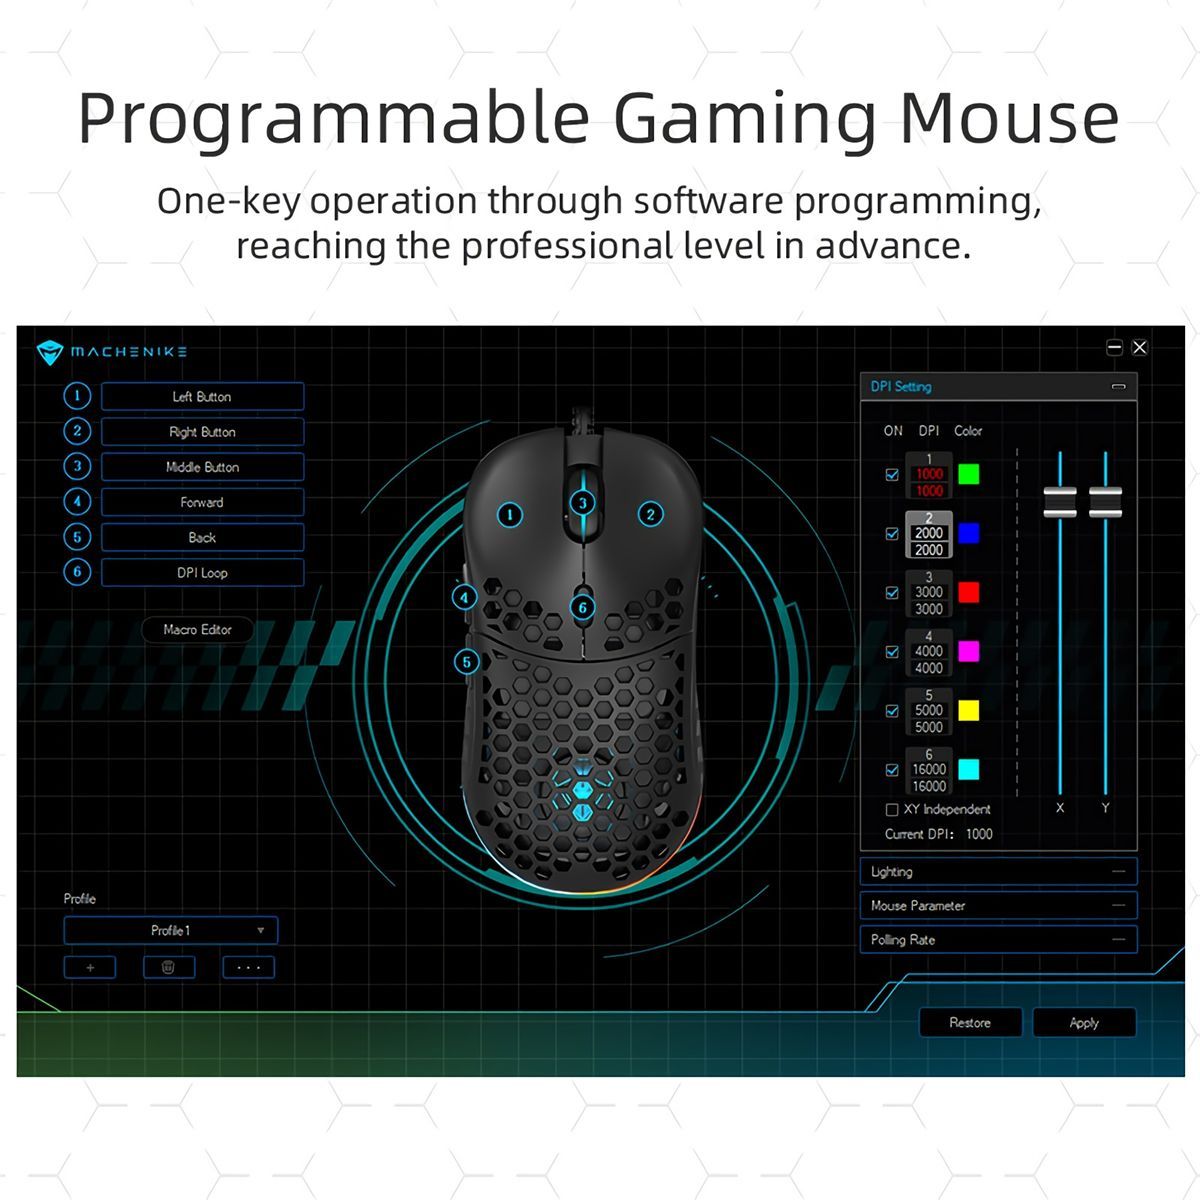 Machenike-M610-Wired-Gaming-Mouse-6400DPI-PMW3325-RGB-Computer-Mouse-Programmable-Hollow-Honeycomb-M-1738188